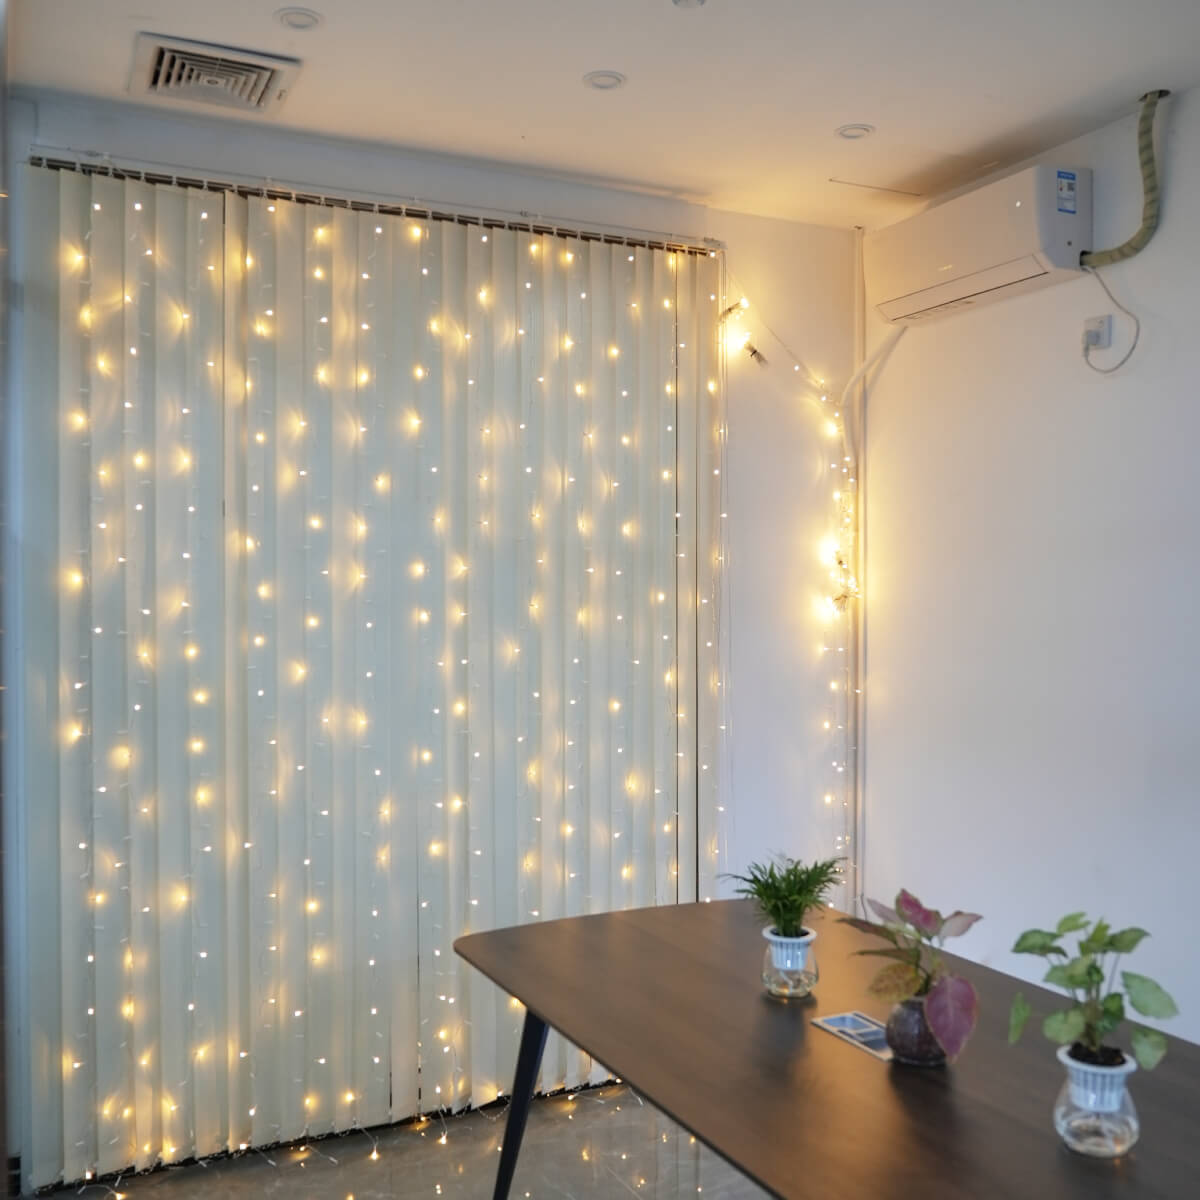 How to Easily Hang Curtain Twinkle Lights – Ollny